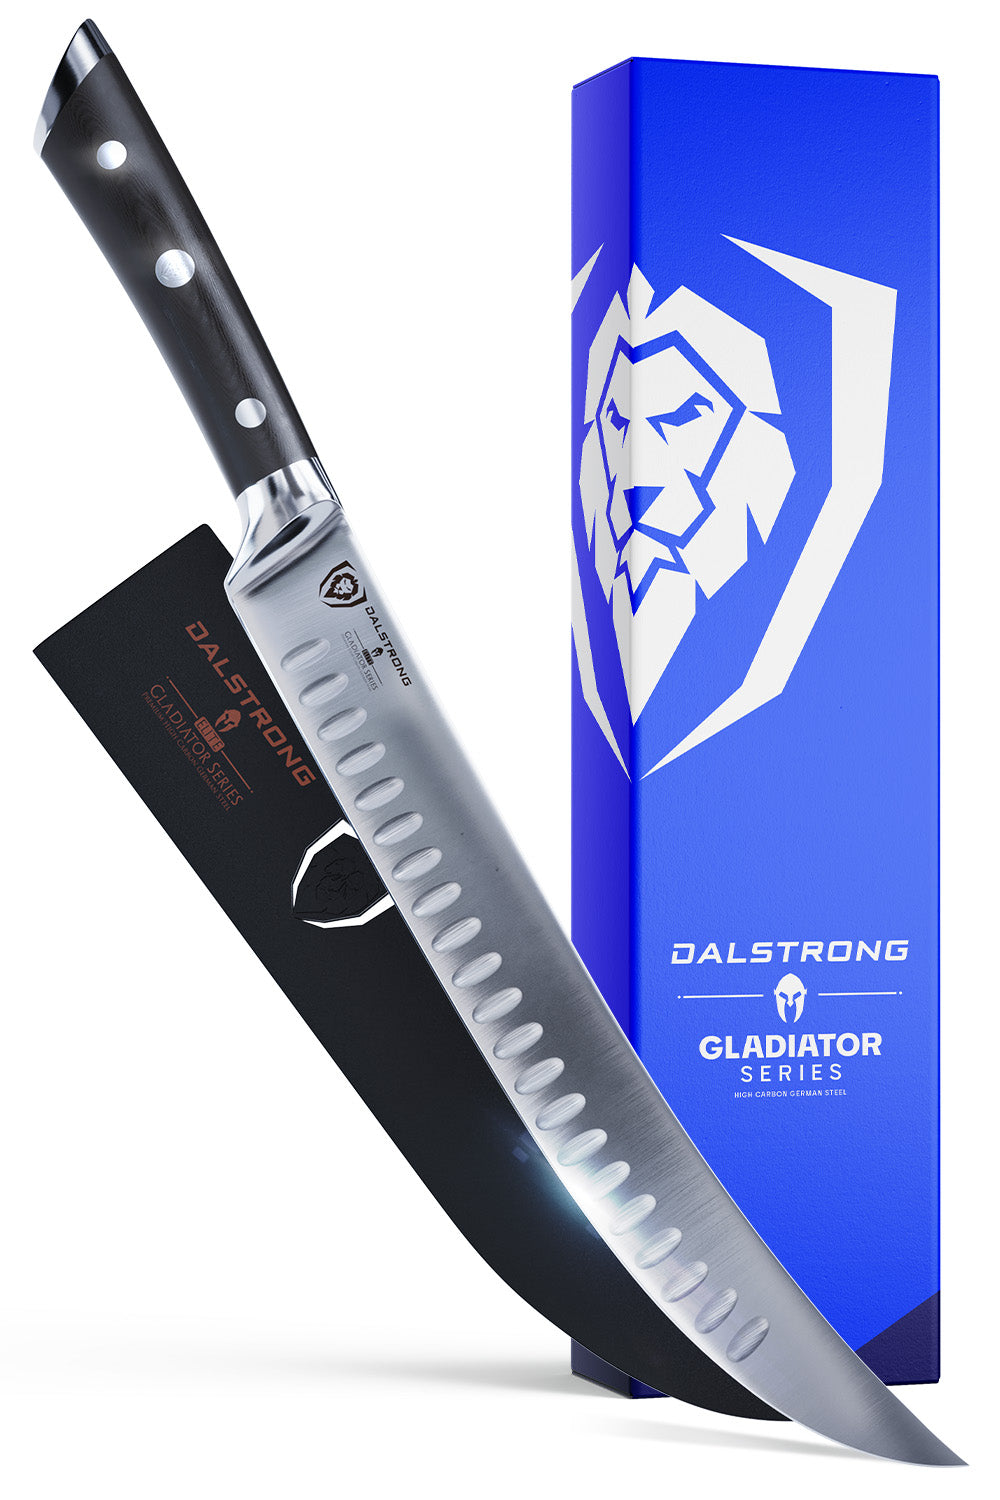 Dalstrong gladiator series 10 inch butcher knife with black handle in front of it's premium packaging.